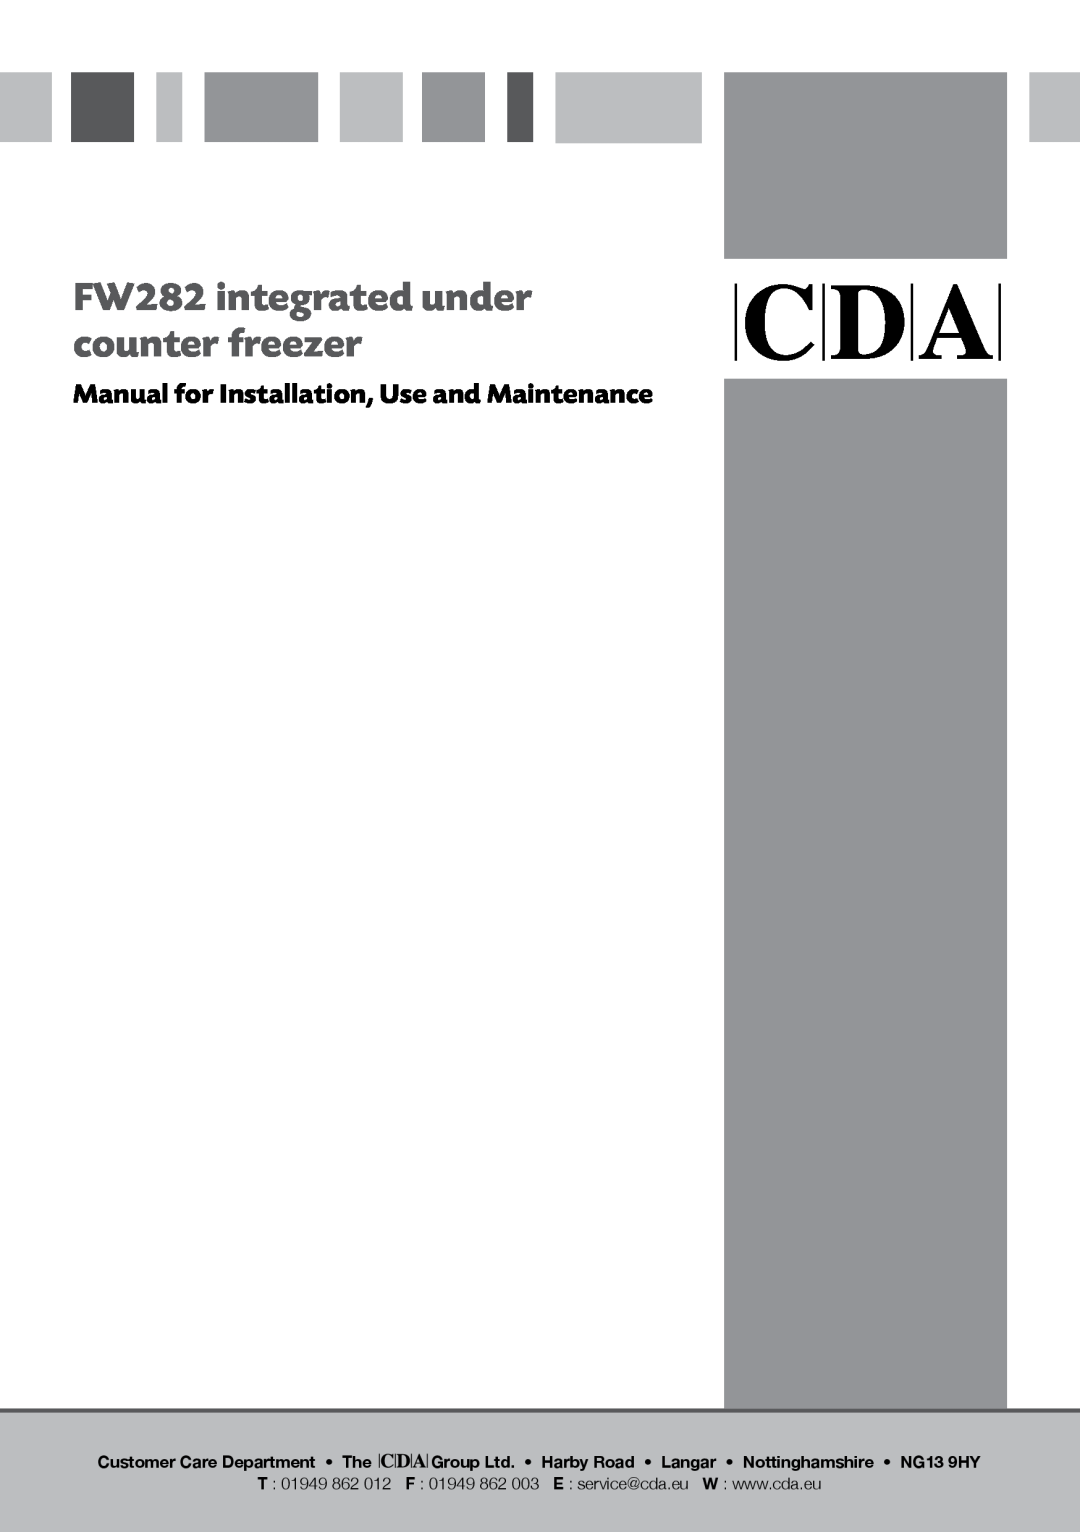 CDA manual FW282 integrated under counter freezer, Manual for Installation, Use and Maintenance, T 01949 862 